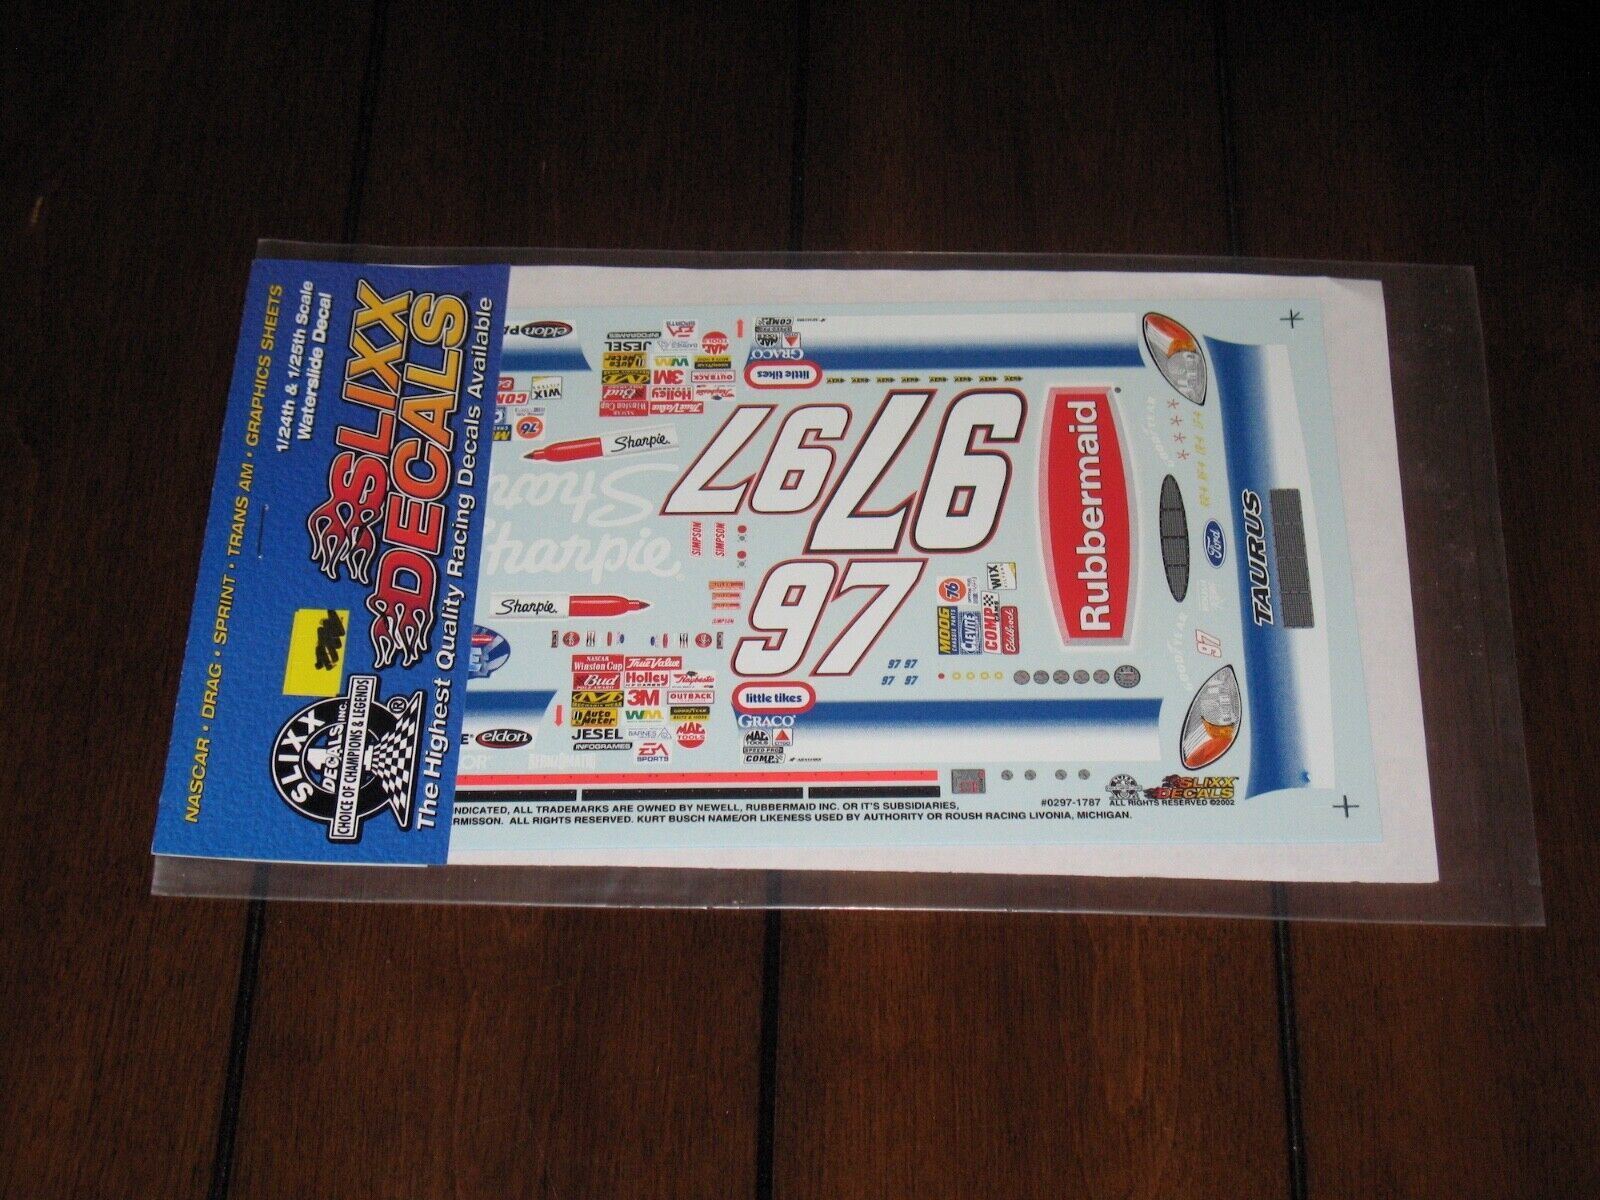 Primary image for Slixx NASCAR 1787 97 Sharpie Rubbermaid Busch Ford Taurus Waterslide Decal 1/24